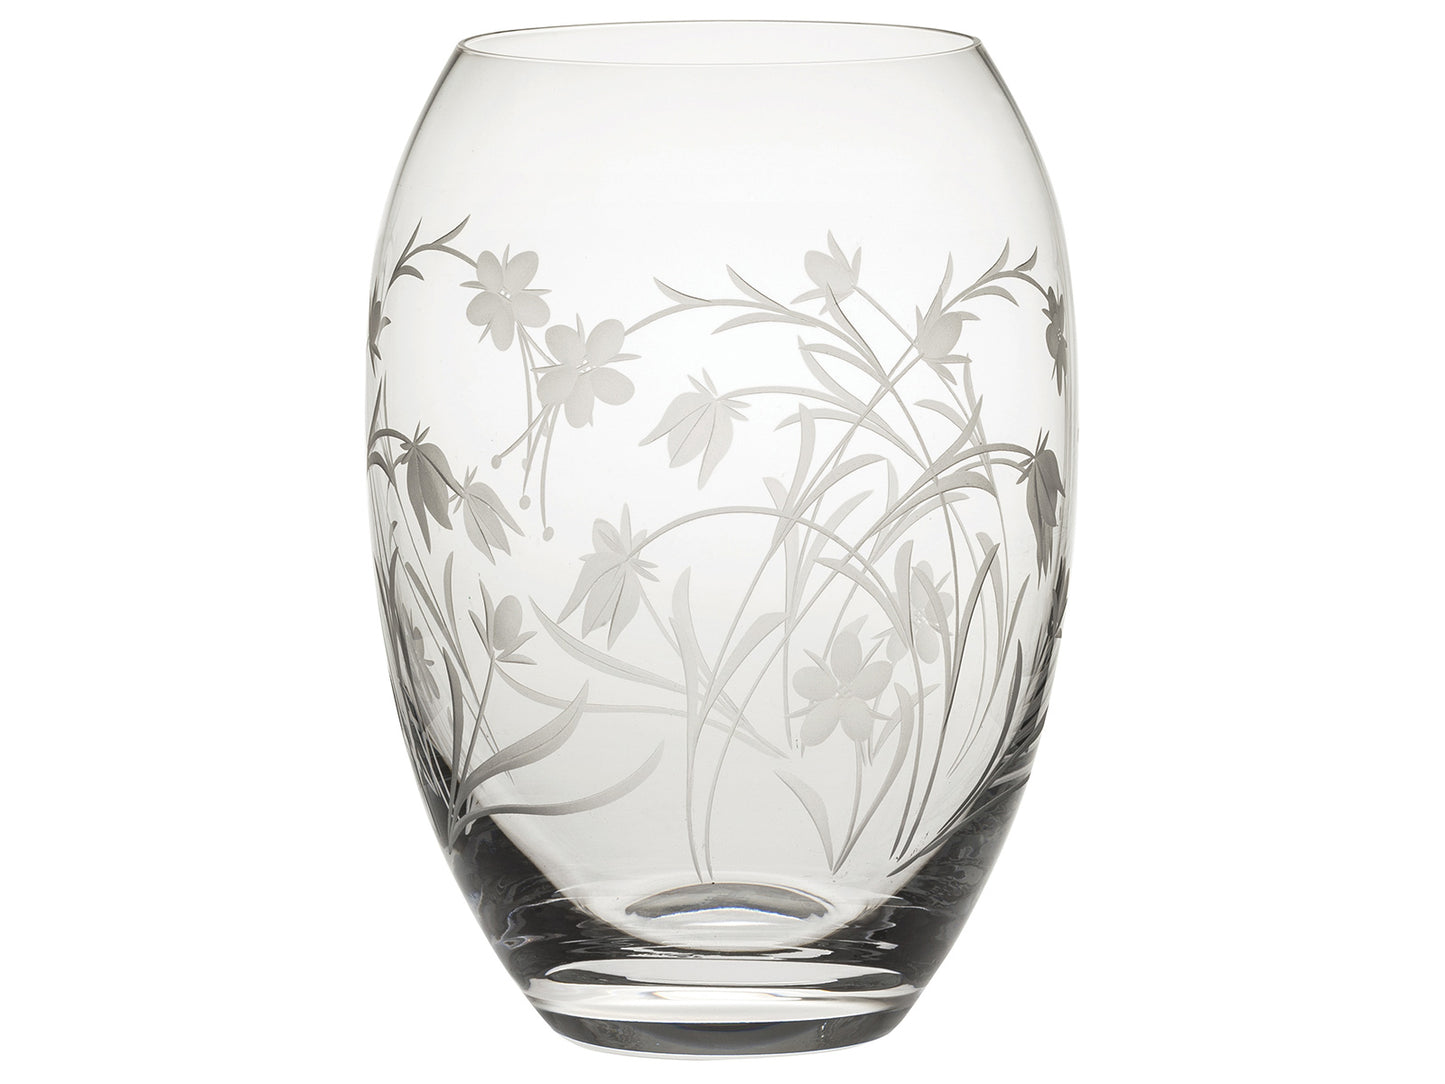 A barrel shaped crystal vase with a delicate floral motif of entwining wildflowers cut into the exterior, giving the motif a frosted appearance.